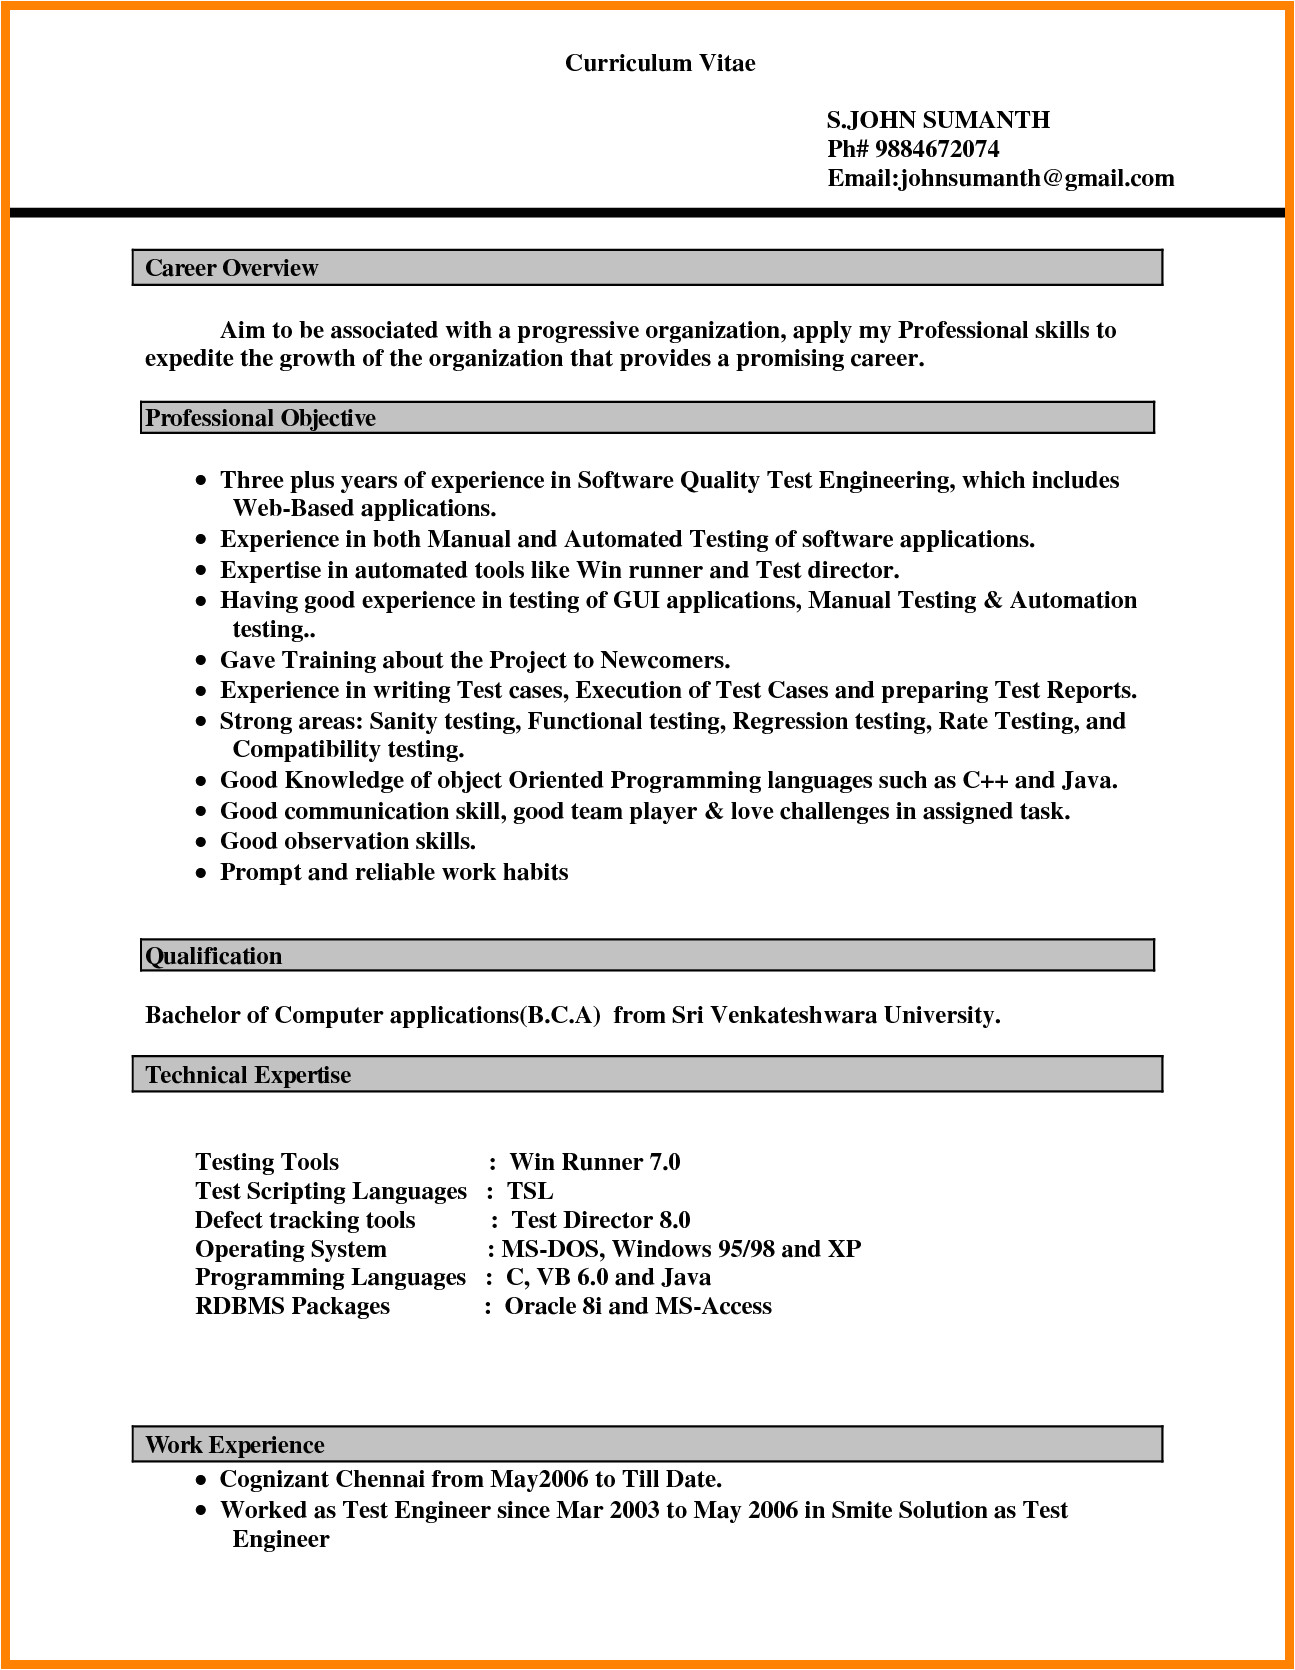 resume templates for microsoft word 2007